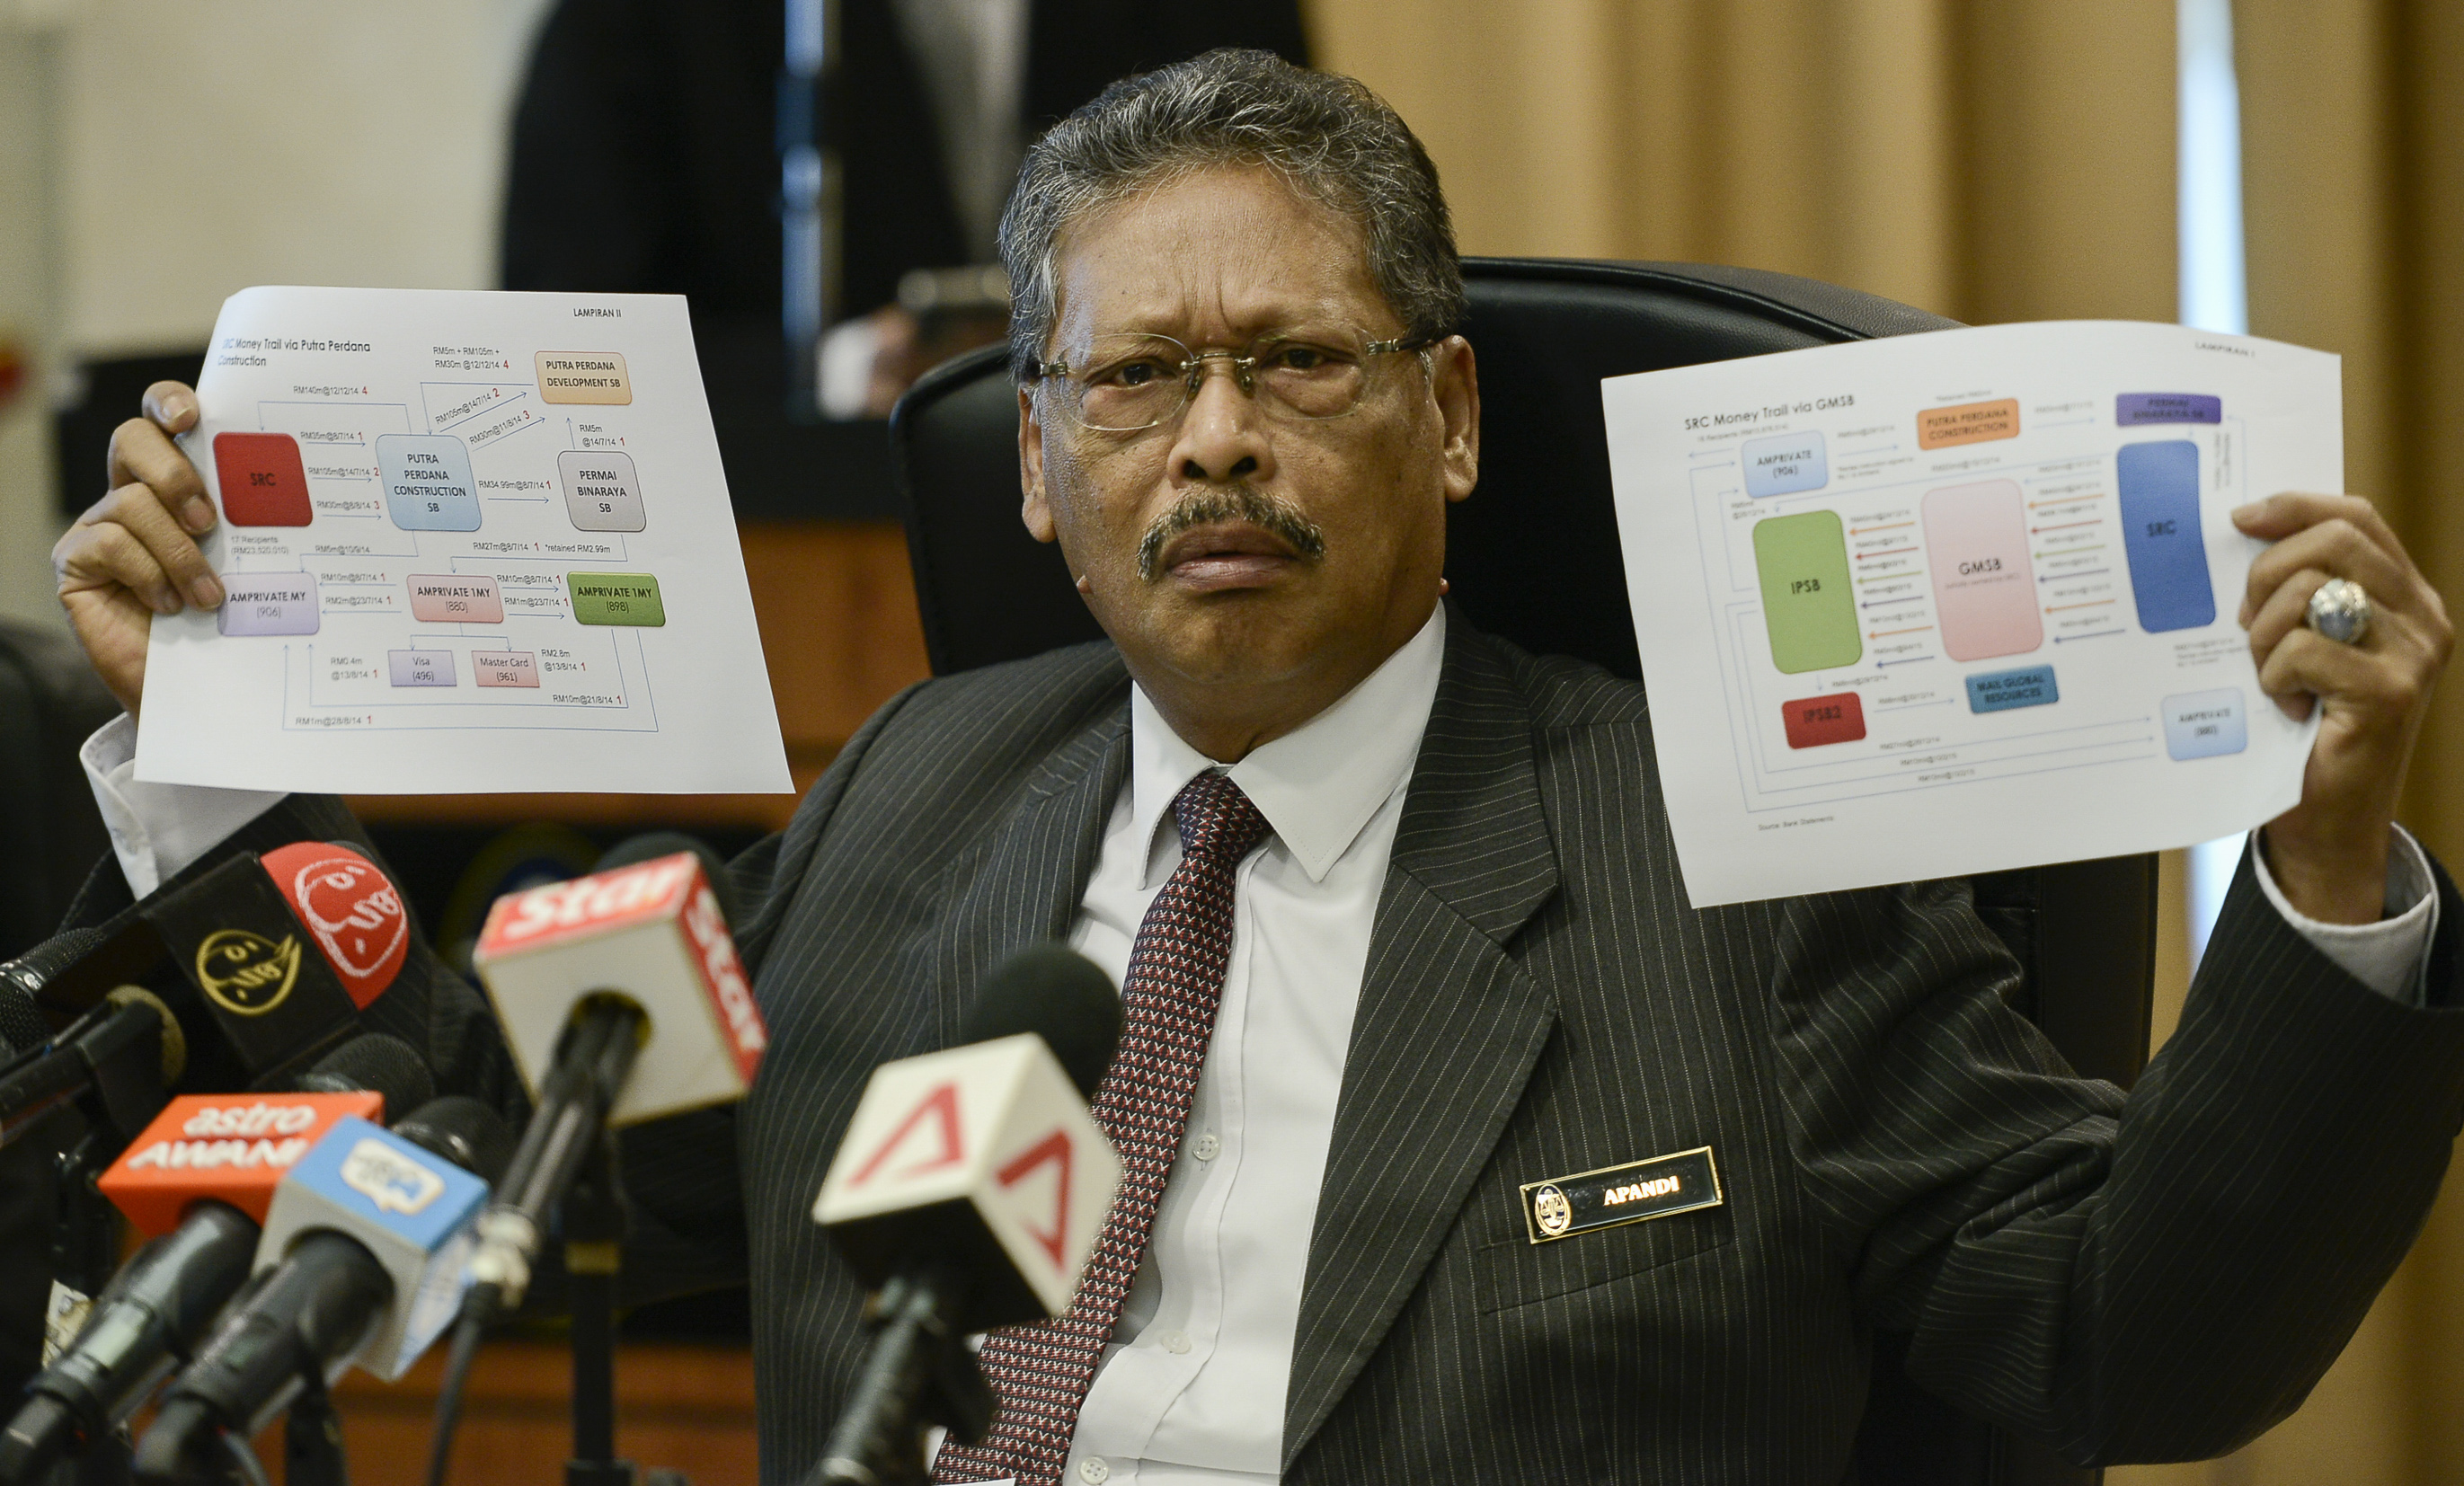 Malaysia's Attorney-General, Mohamed Apandi Ali shows money flow charts during a press conference in Putrajaya, Malaysia, 26 January 2016. (STR/EPA)